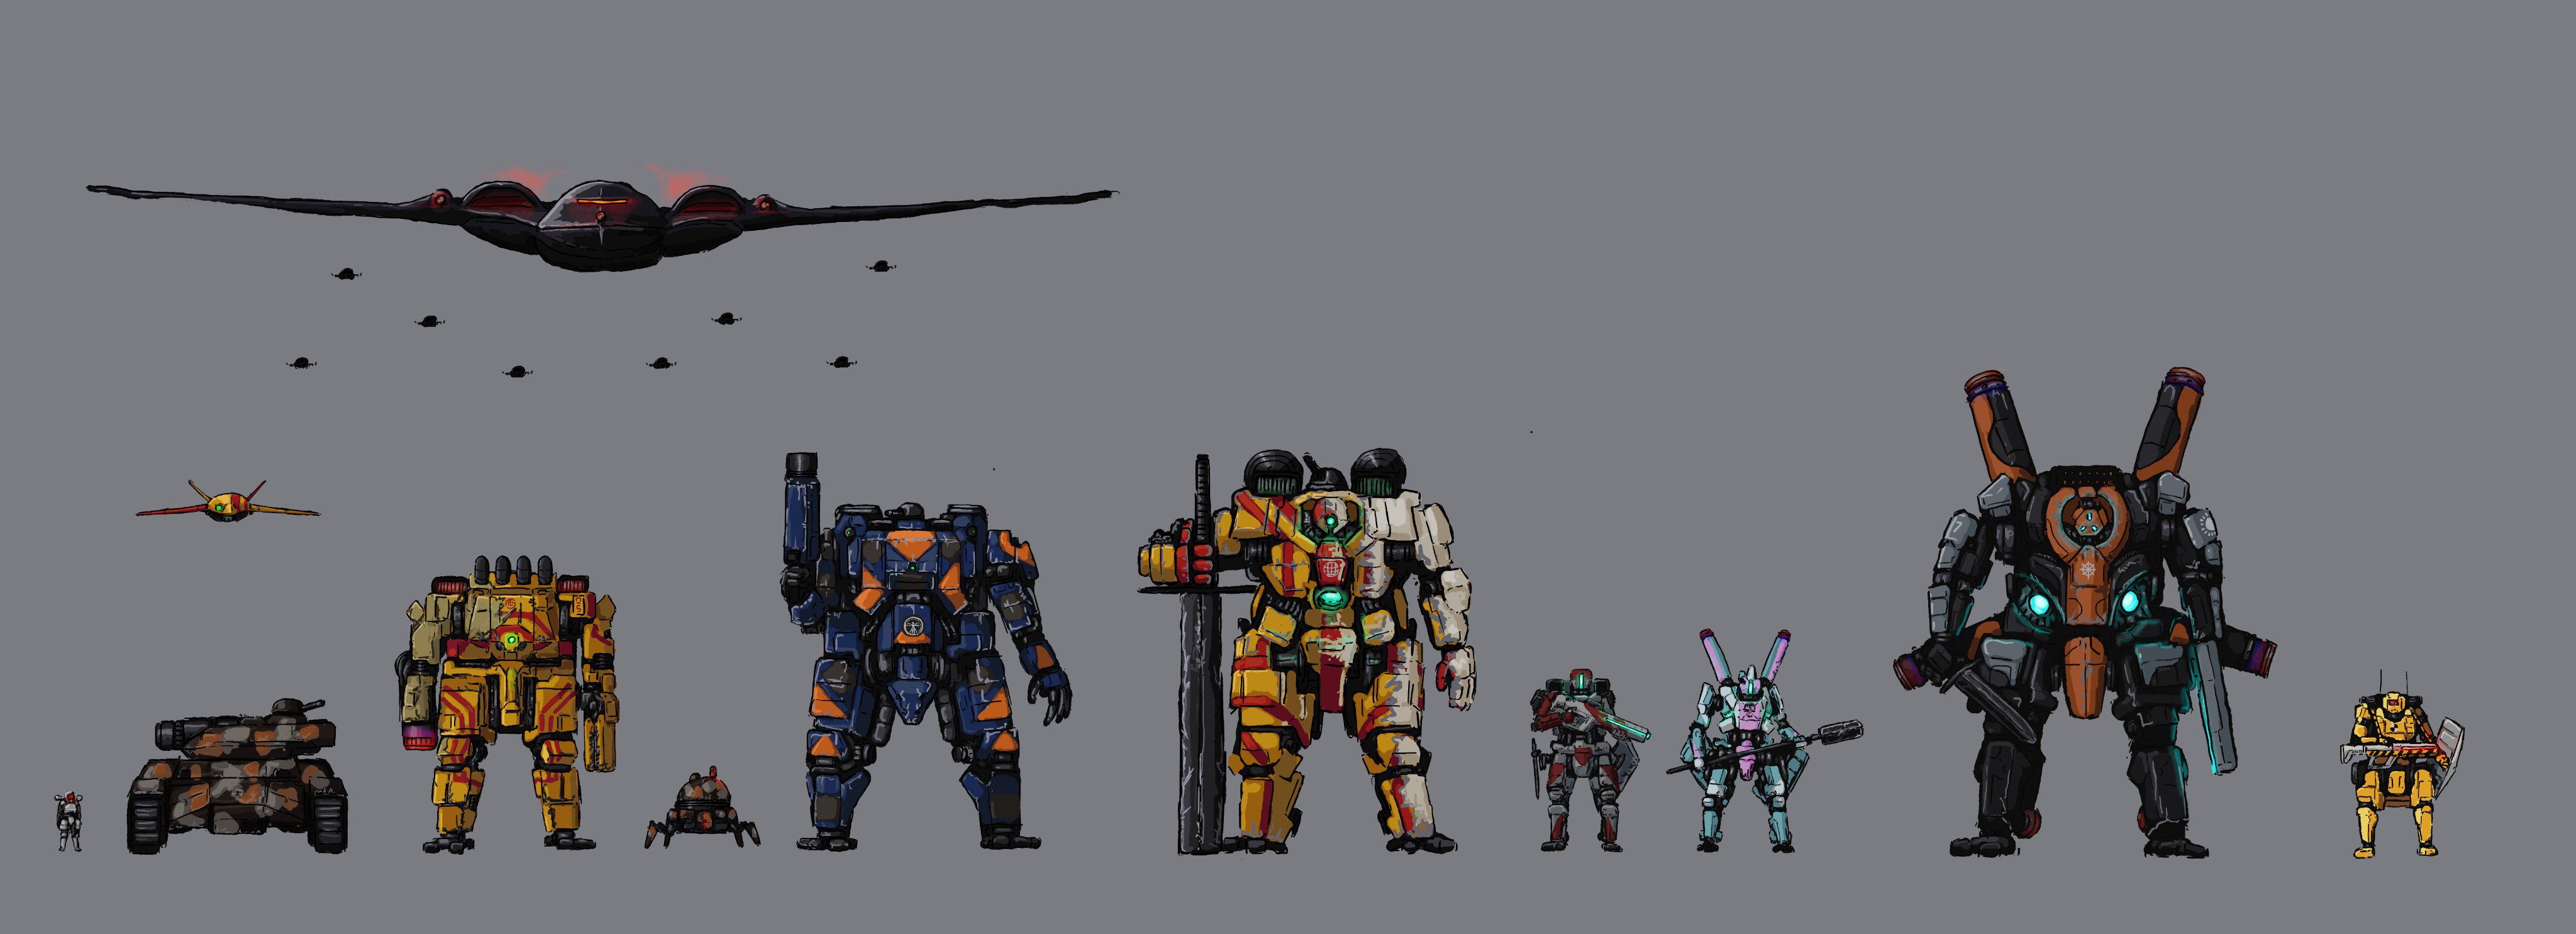 falanks Prøve Ud over Oshlet (Comms Open) on Twitter: "Full set of mechs and other vehicles from  the Scum setting I'm working on, starting with nuclear equipped relics of  the Age of Devastation, to the sword